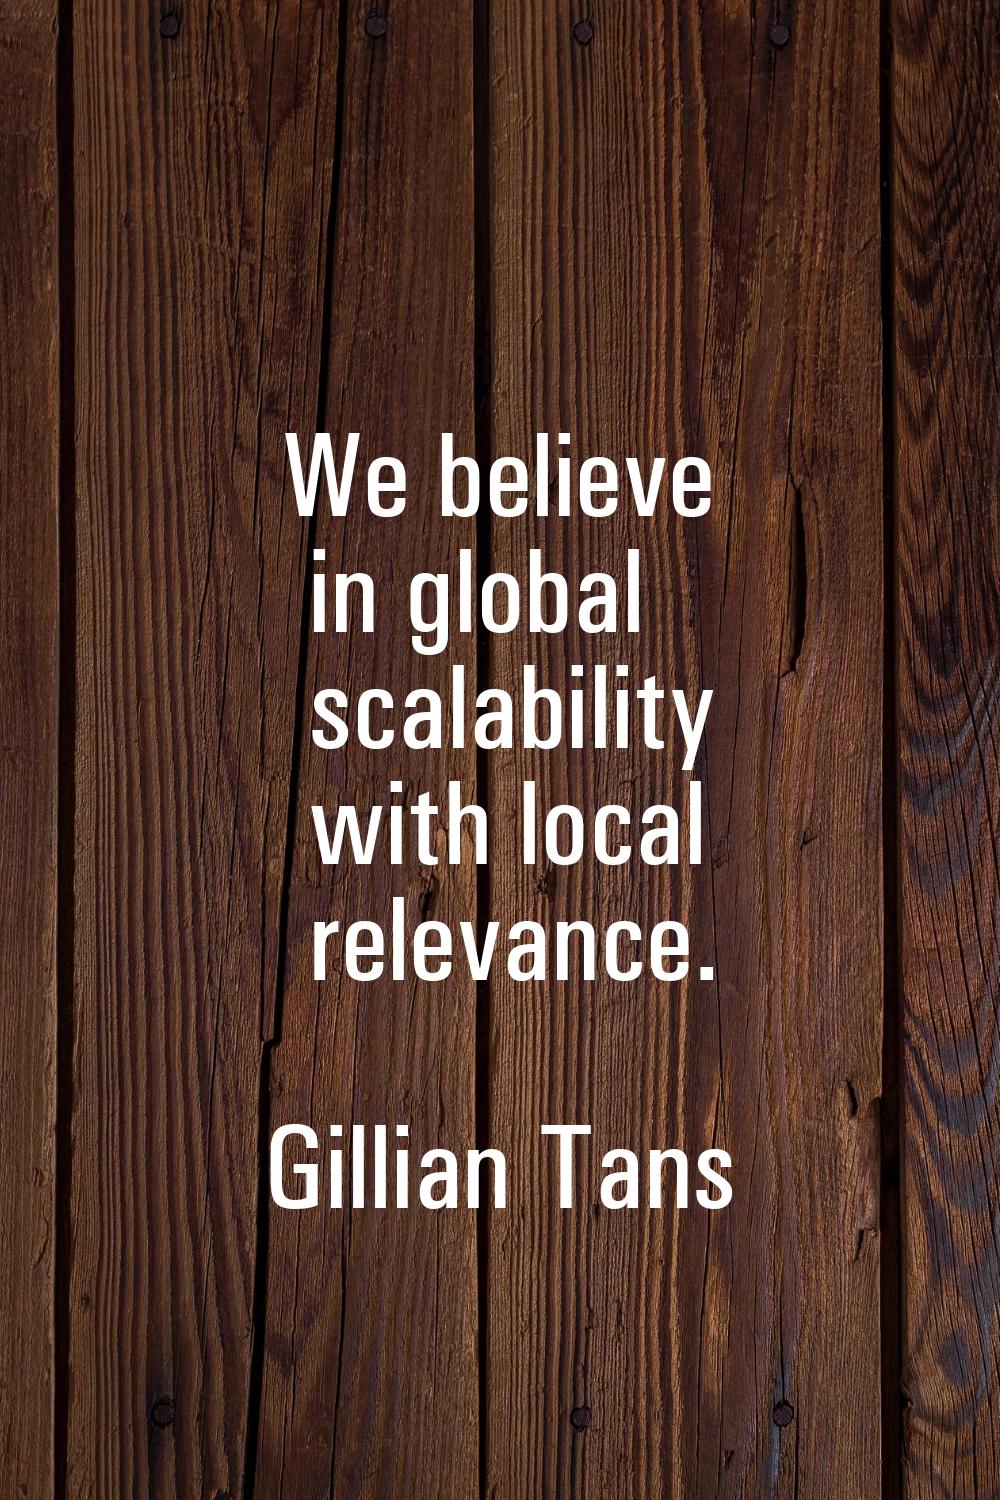 We believe in global scalability with local relevance.